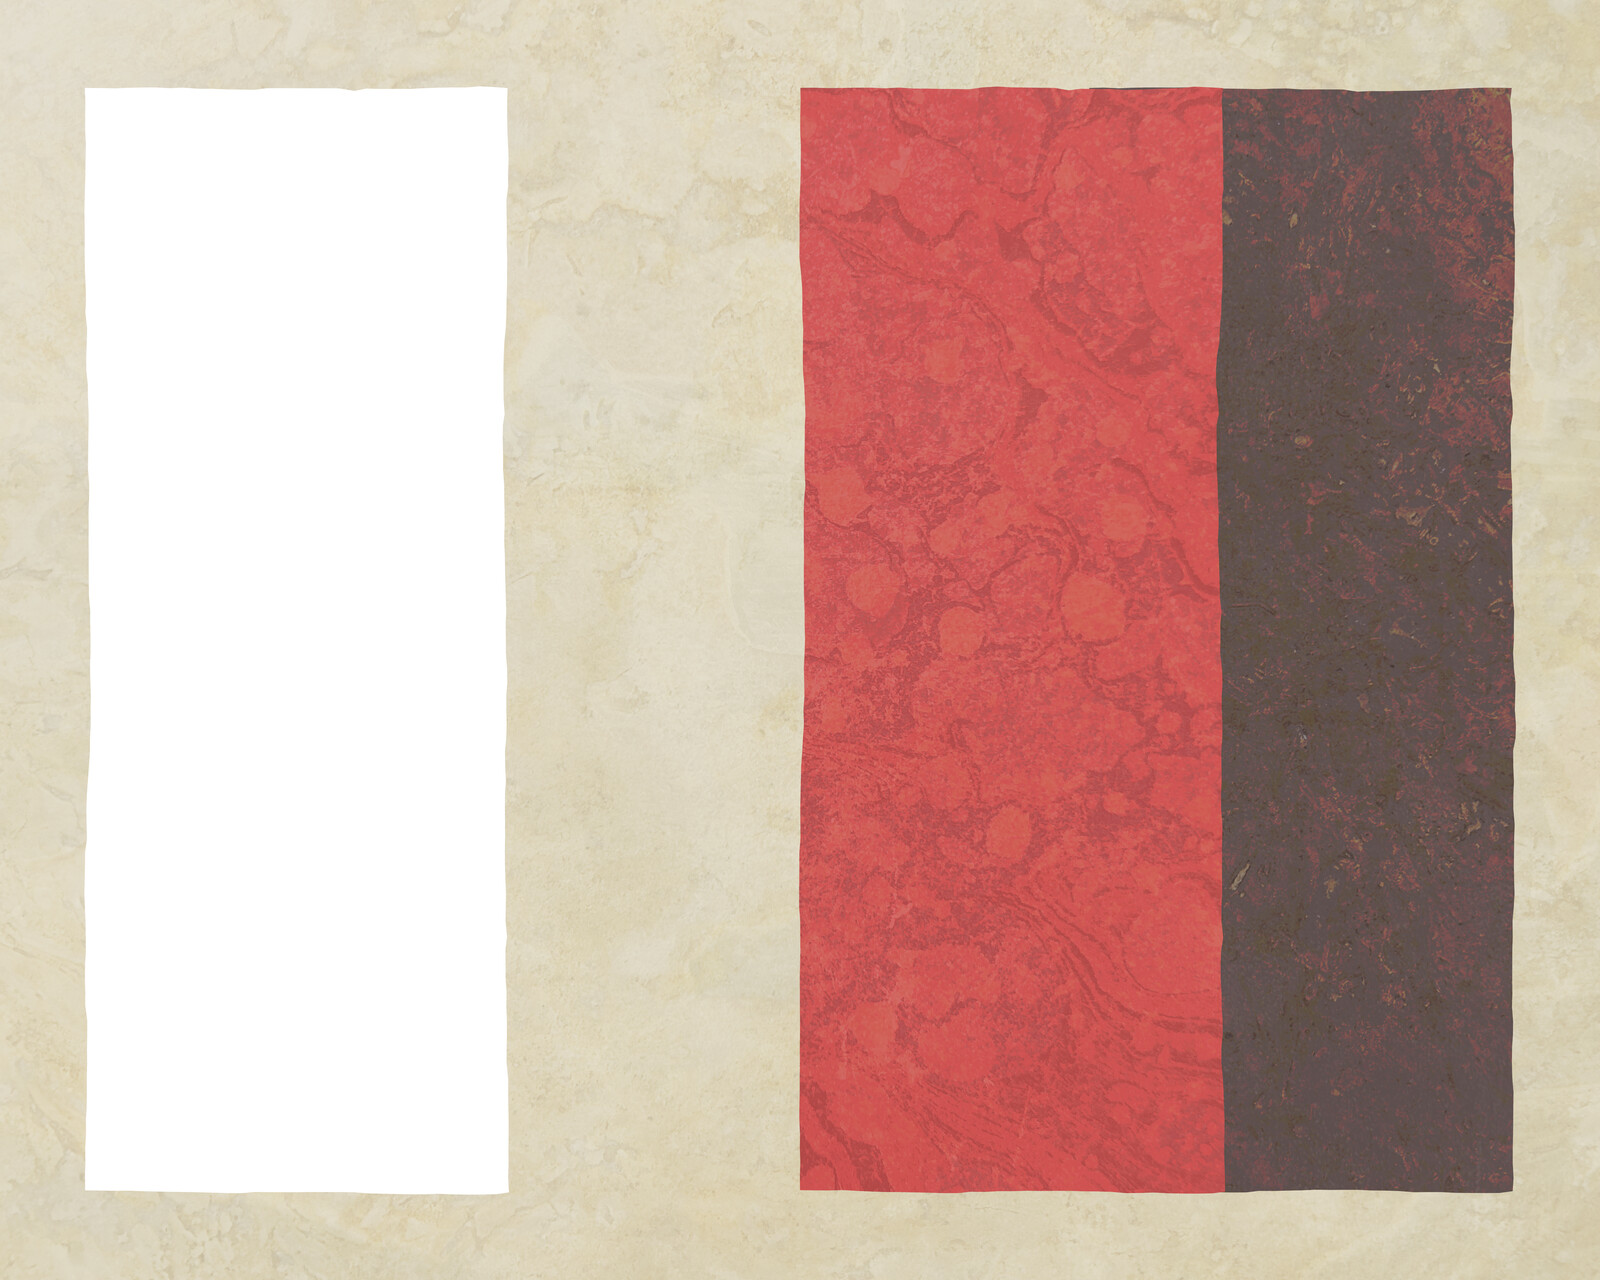 Left to right: a white rectangle, a red rectangle, a dark brown rectangle.